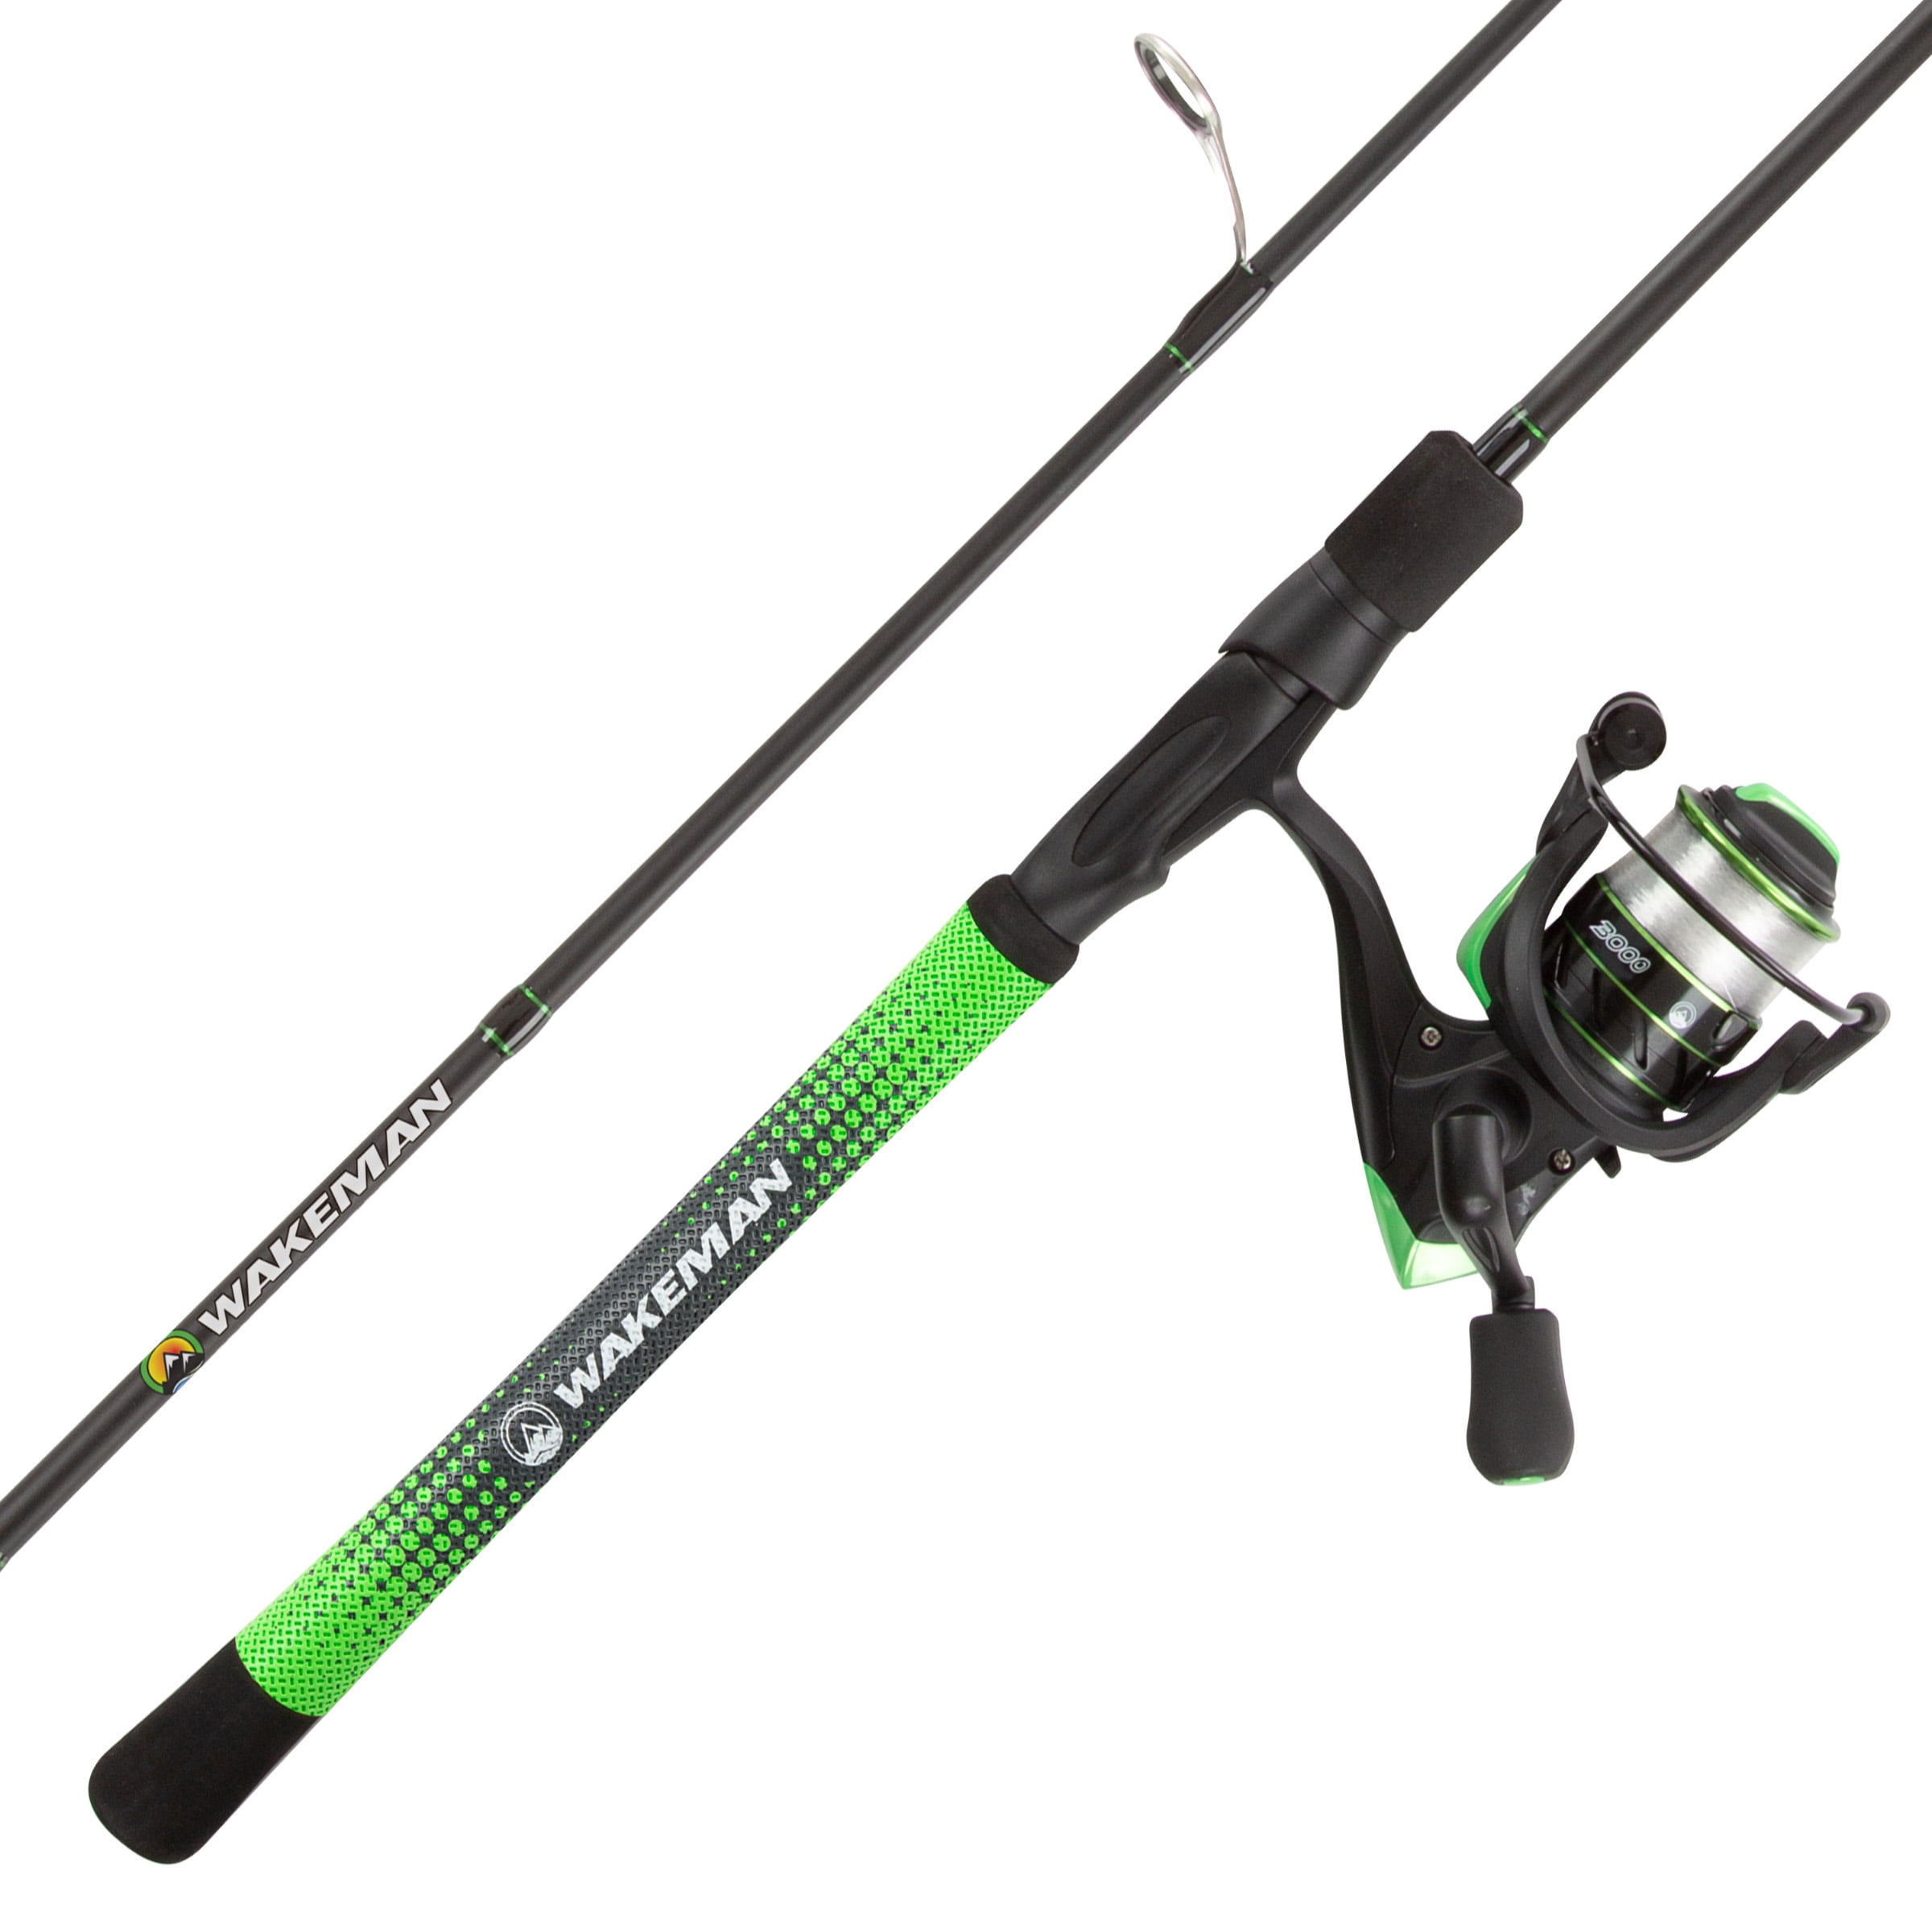 Rad Sportz Spinning Fishing Rod & Reel Combo- 6 ft. 6 in. Carbon Pole, Green